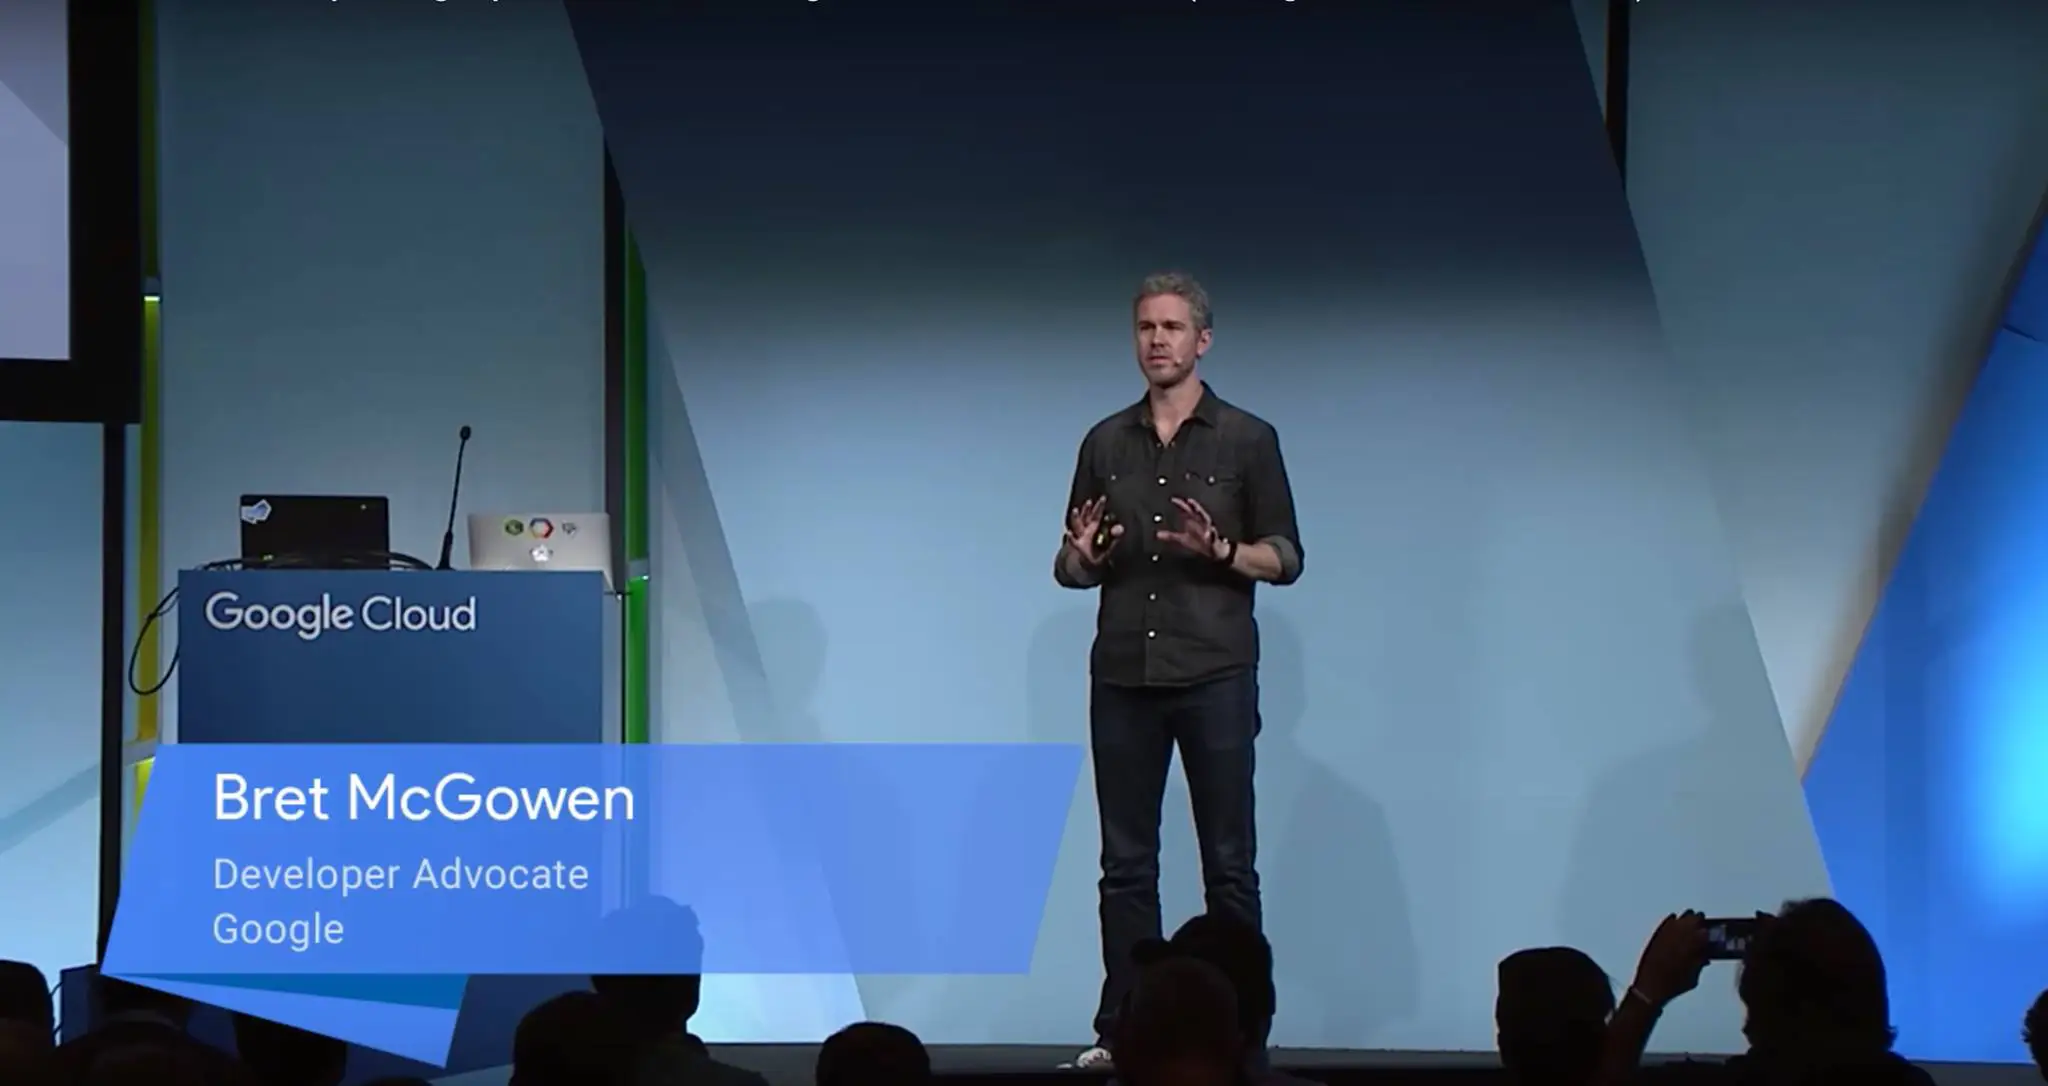 Bret McGowen onstage at a Google Cloud conference in London